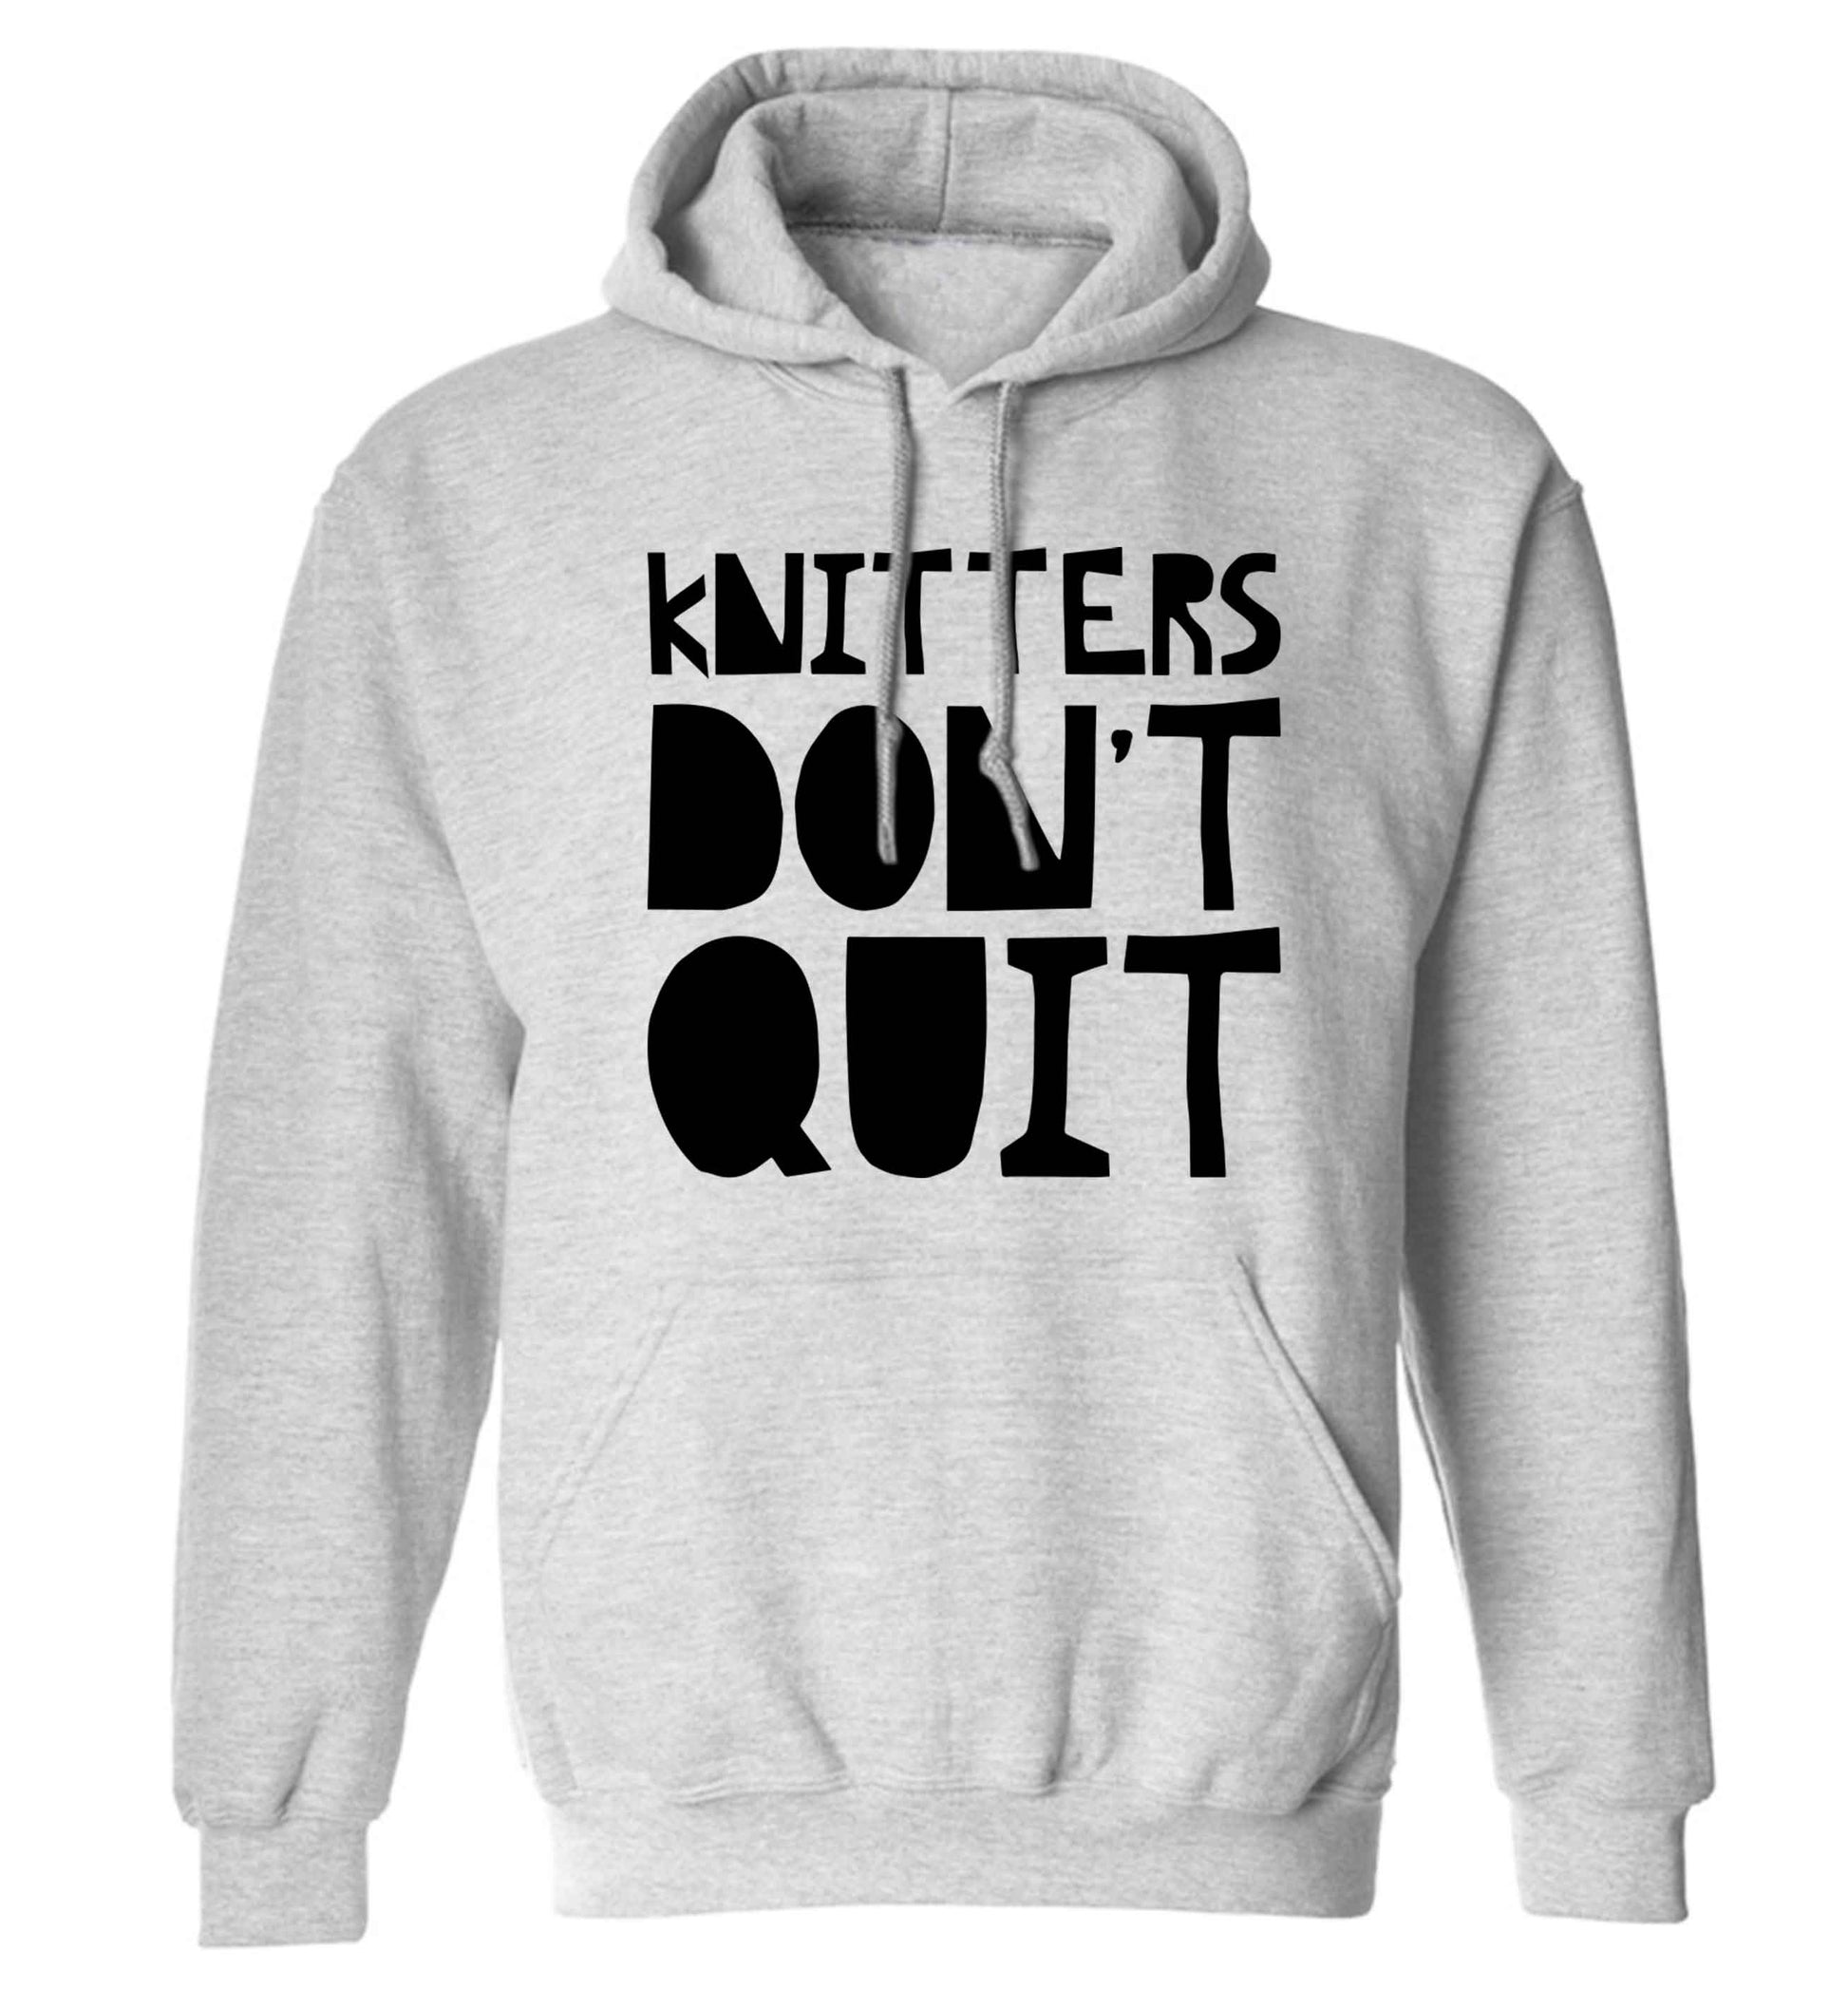 Knitters don't quit adults unisex grey hoodie 2XL